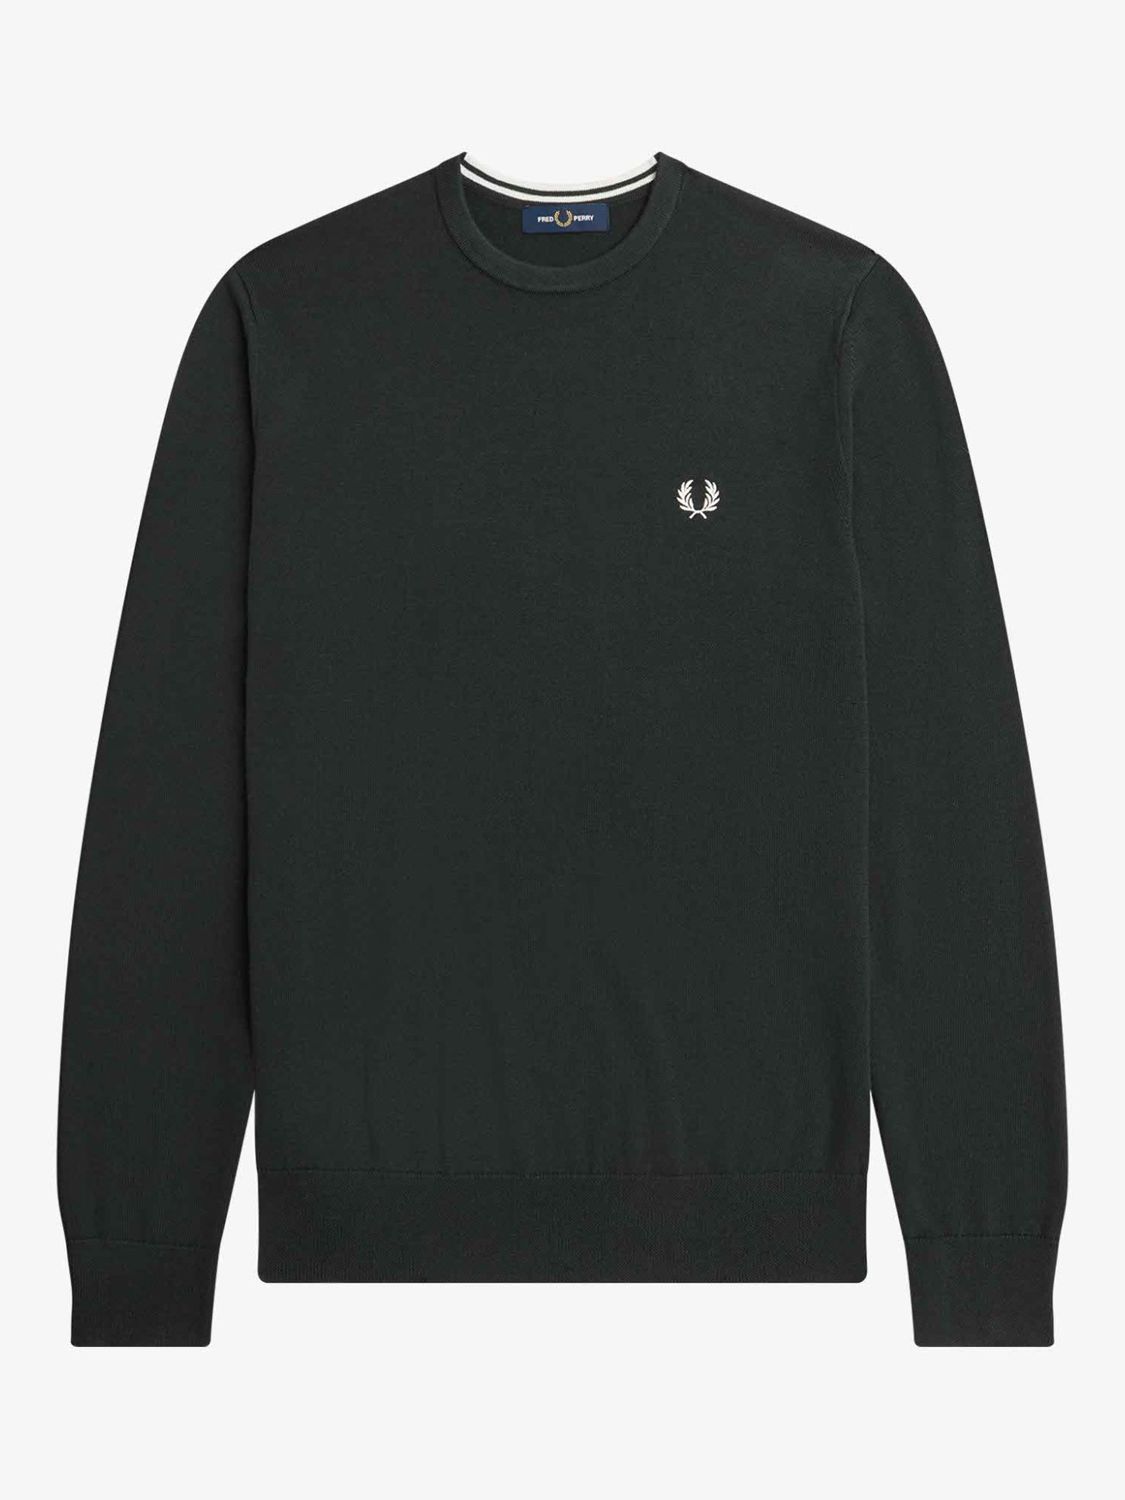 Fred Perry Crew Neck Jumper, Green at John Lewis & Partners